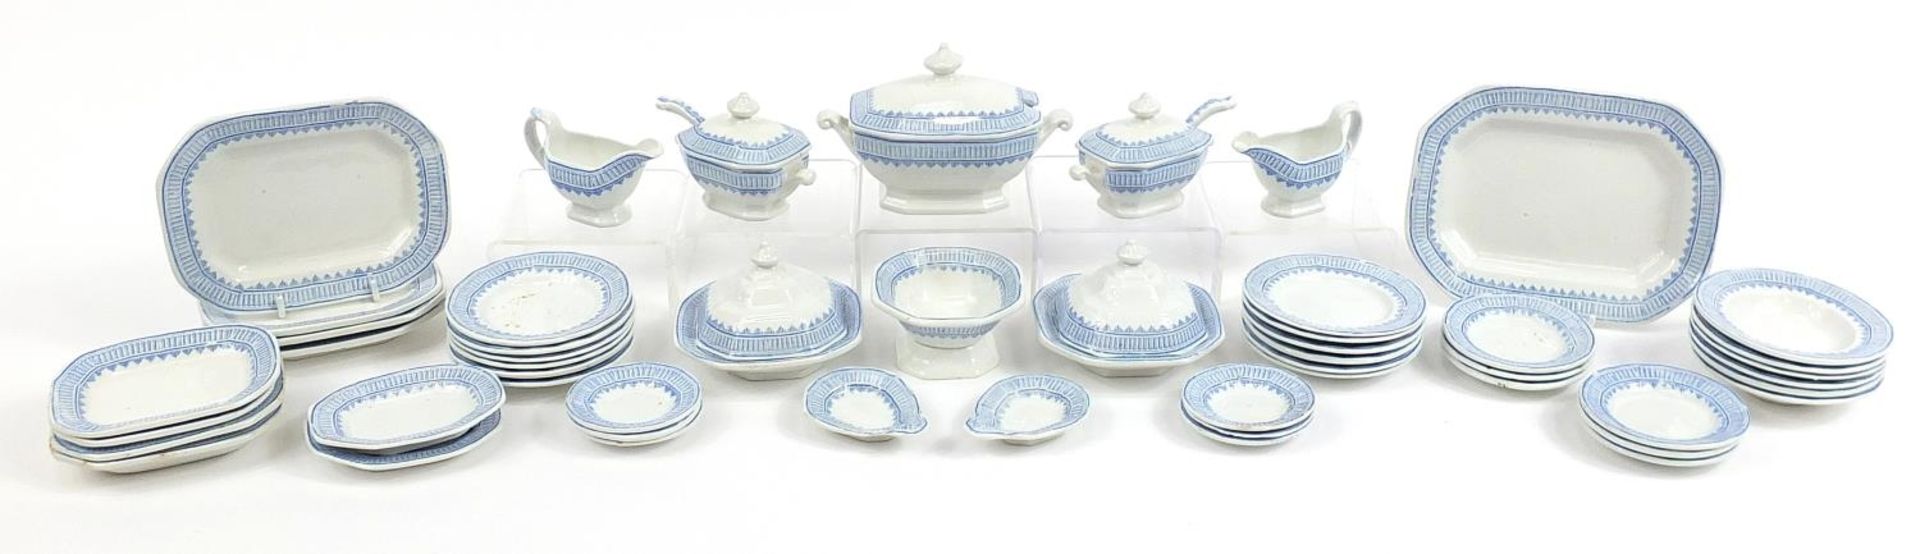 Victorian doll's house china dinner and teaware, some marked Brompton including lidded tureens and